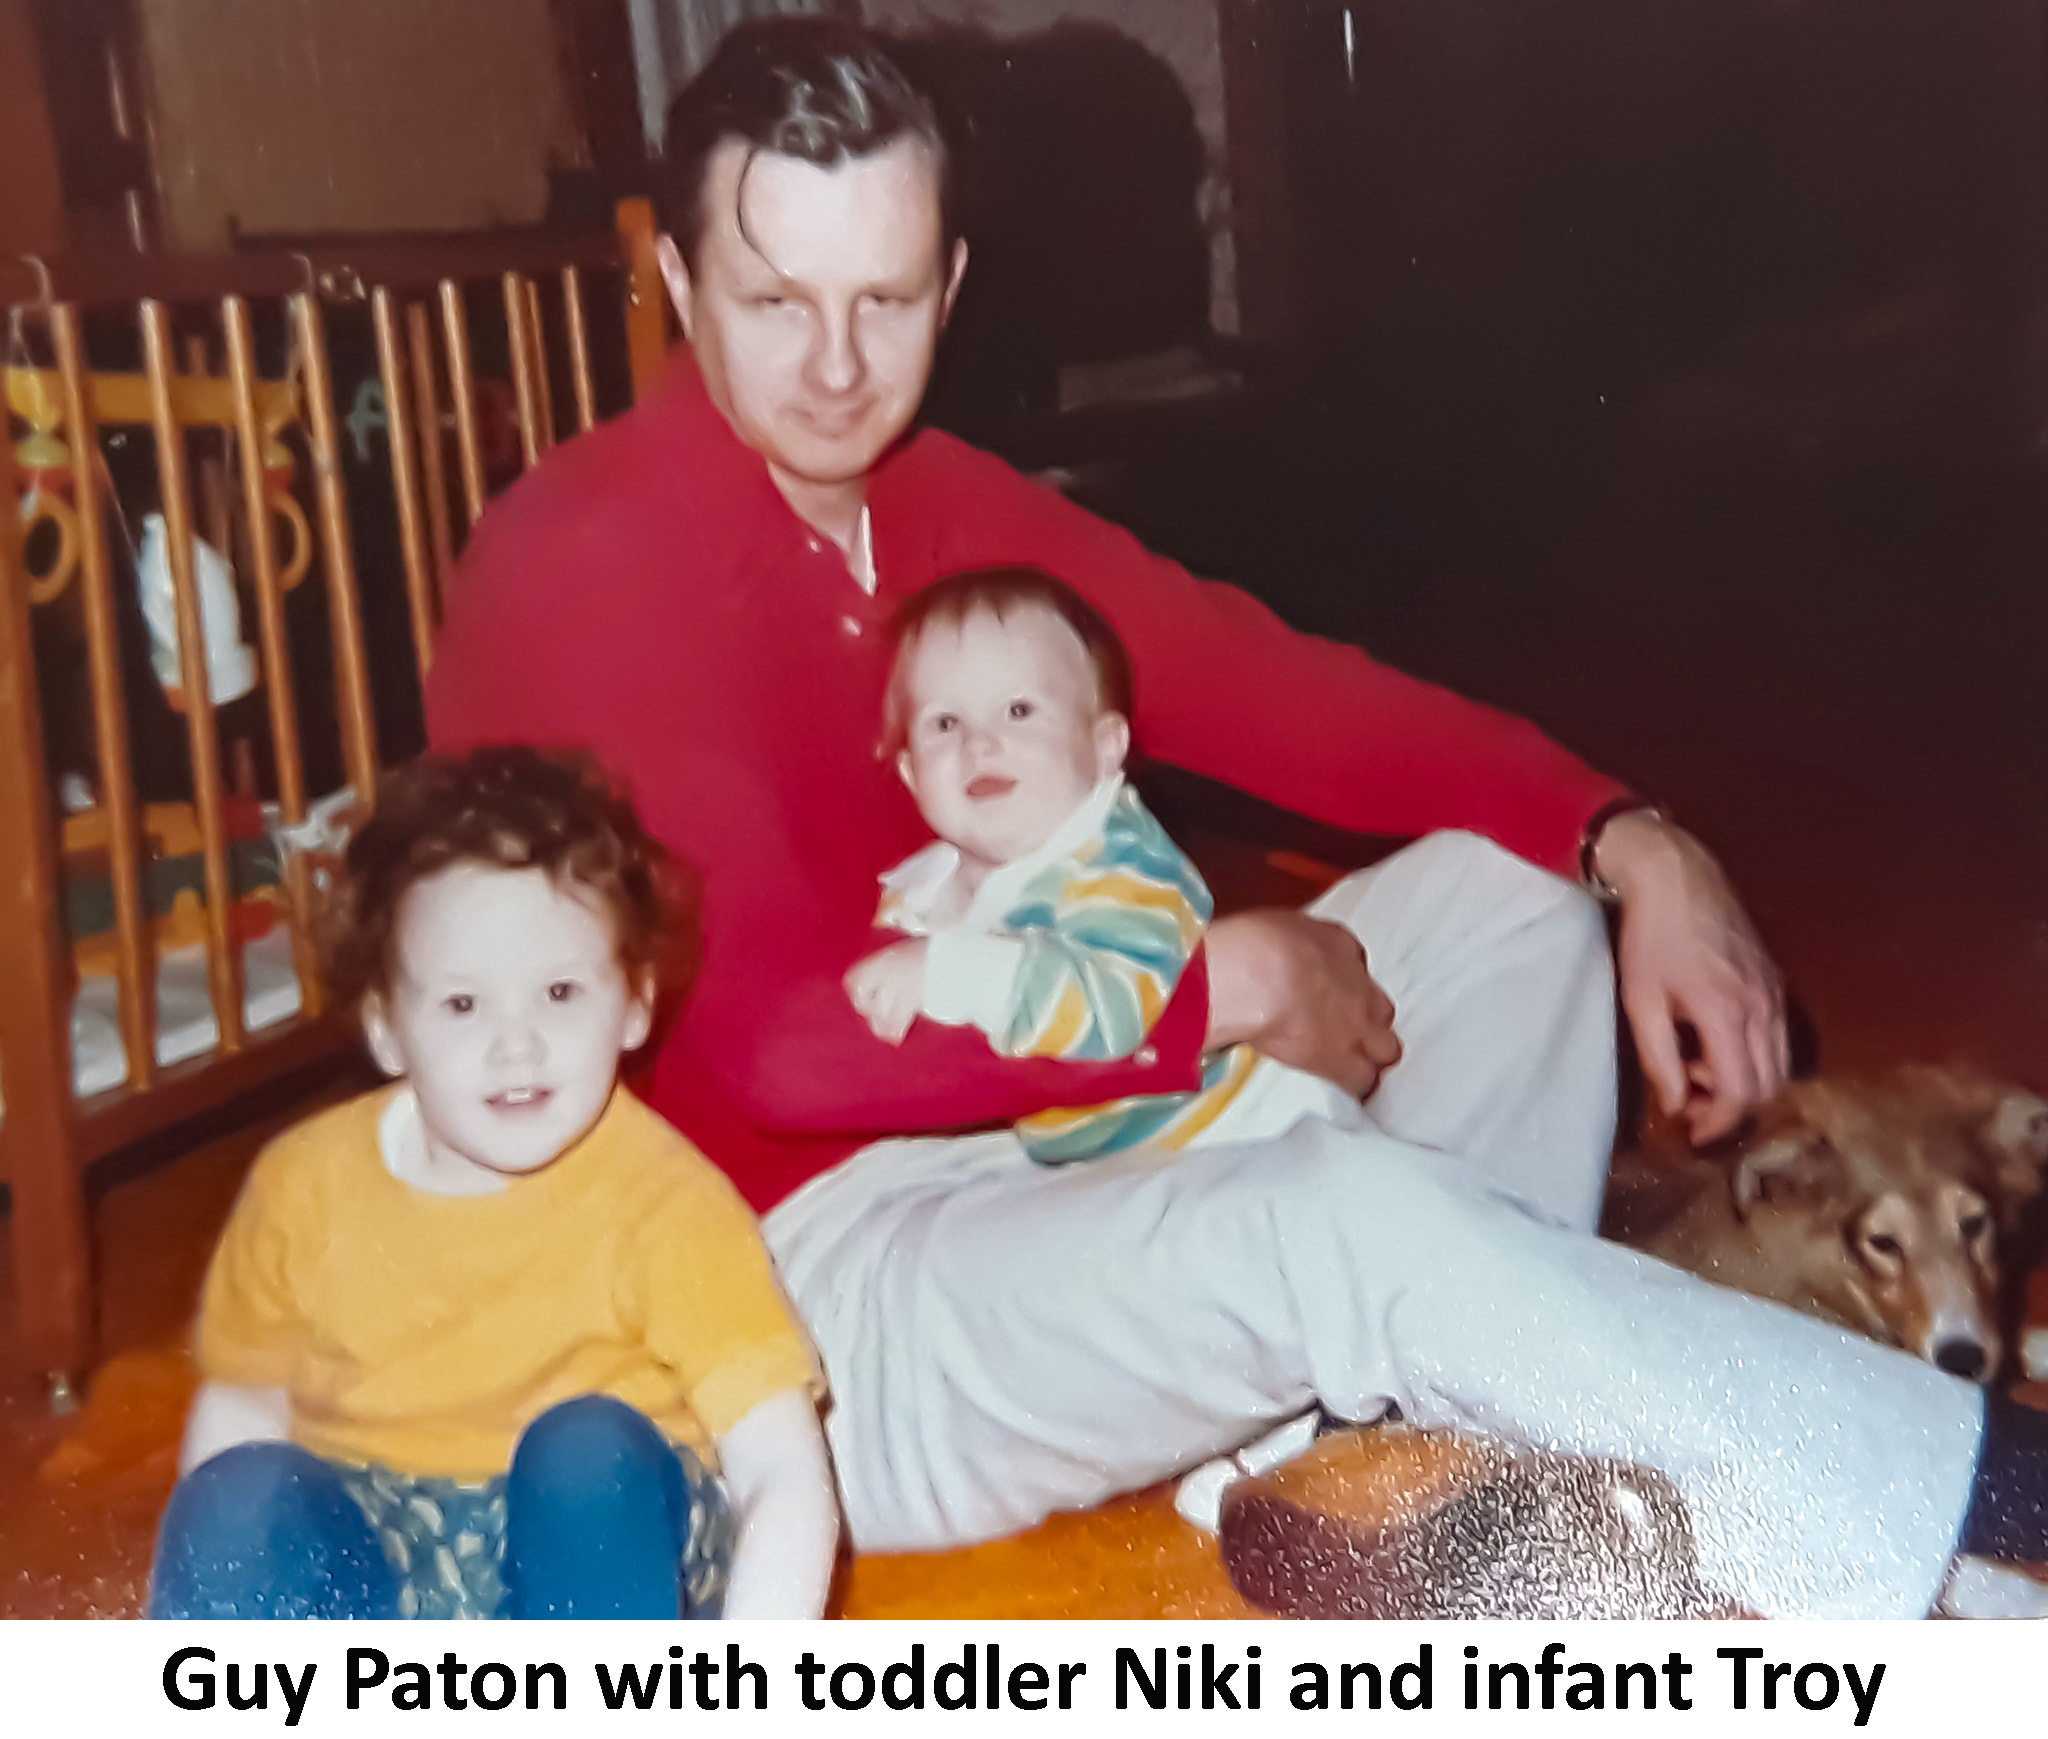 Guy Paton is sitting on the floor in front of a crib and holding Troy Paton.
                 Niki is sitting beside him.